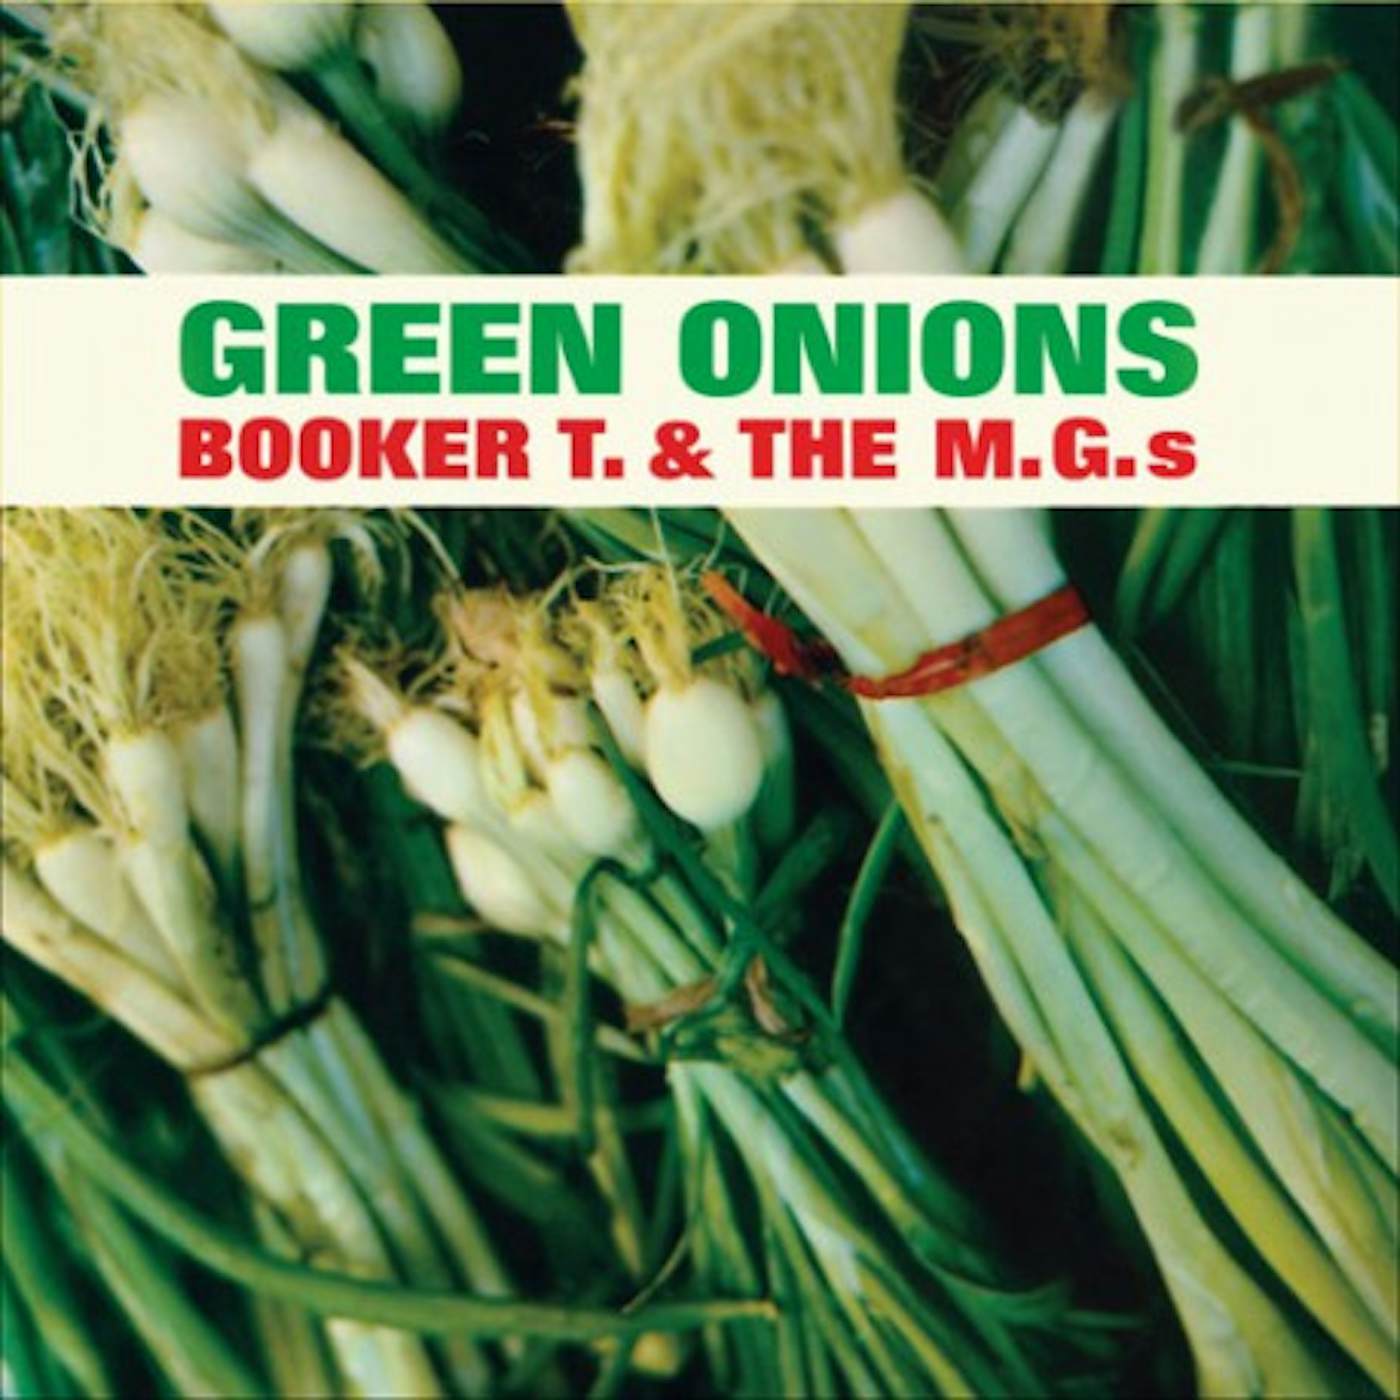 Booker T. & the M.G.'s GREEN ONIONS (Green) Vinyl Record - Limited Edition, 180 Gram Pressing, Remastered, Spain Release